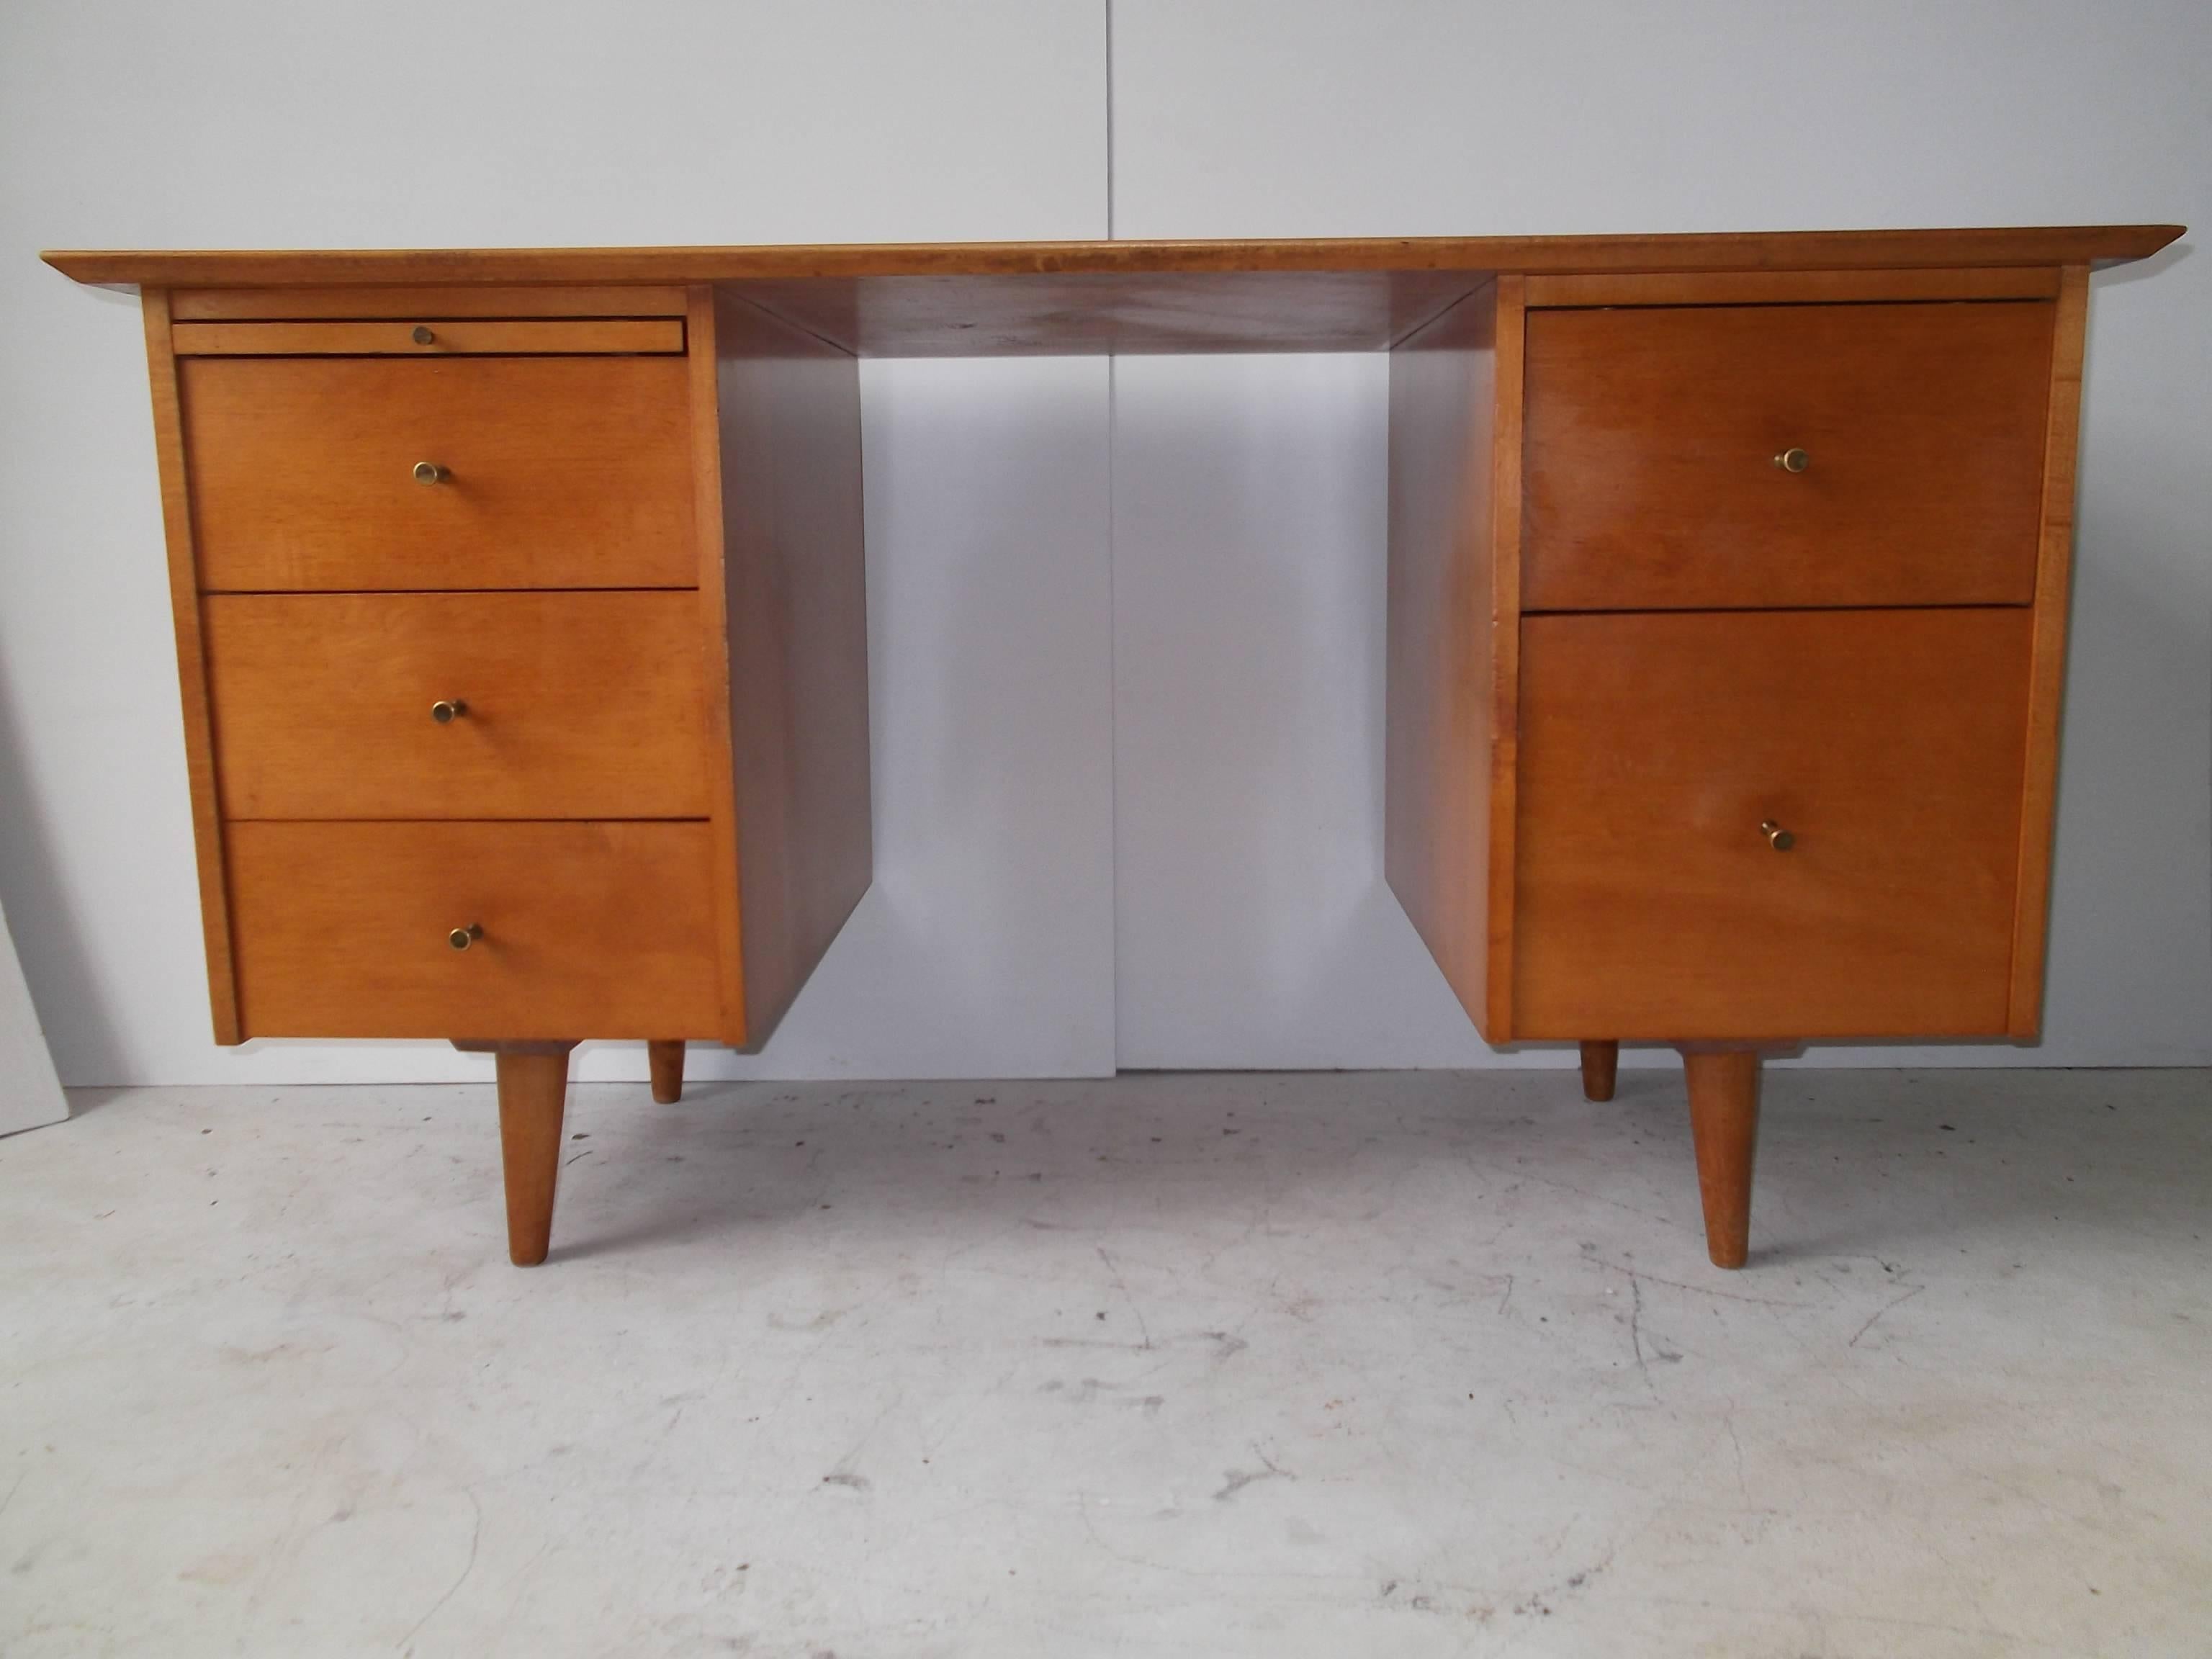 This is a beautiful 1950s desk by Paul McCobb, in the Planner Group Line, for Winchendon Furniture Co. It is from the 1950s, and retains its orig. nice finish. It is in the rarer double pedestal configuration, with five-drawer and a pull-out writing